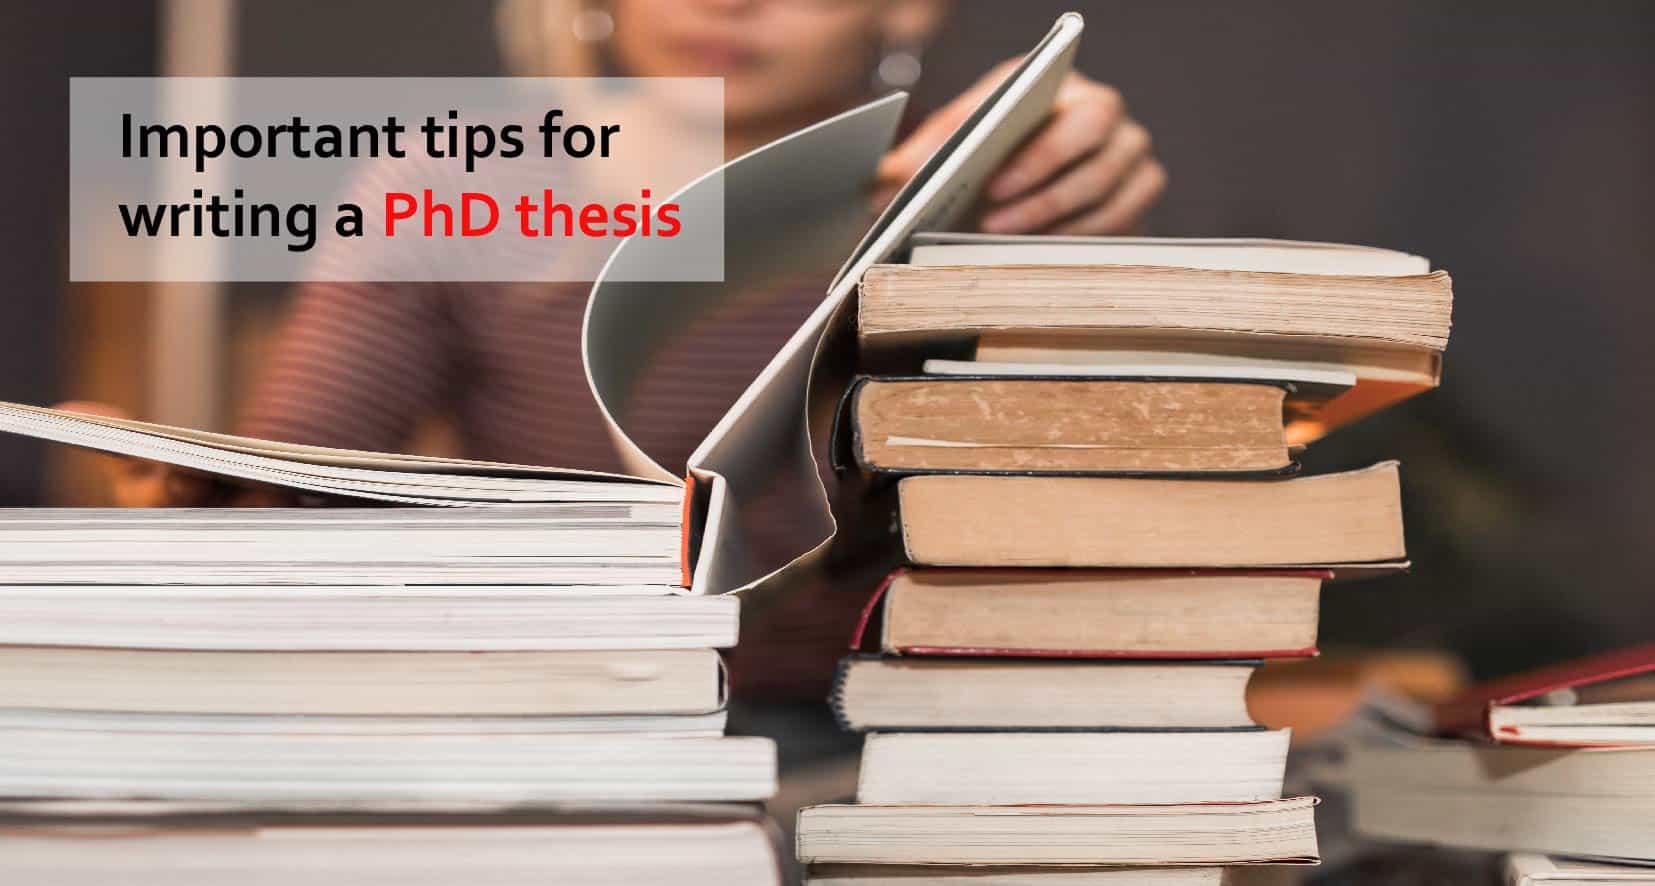 Company consulting dissertation doctoral writing